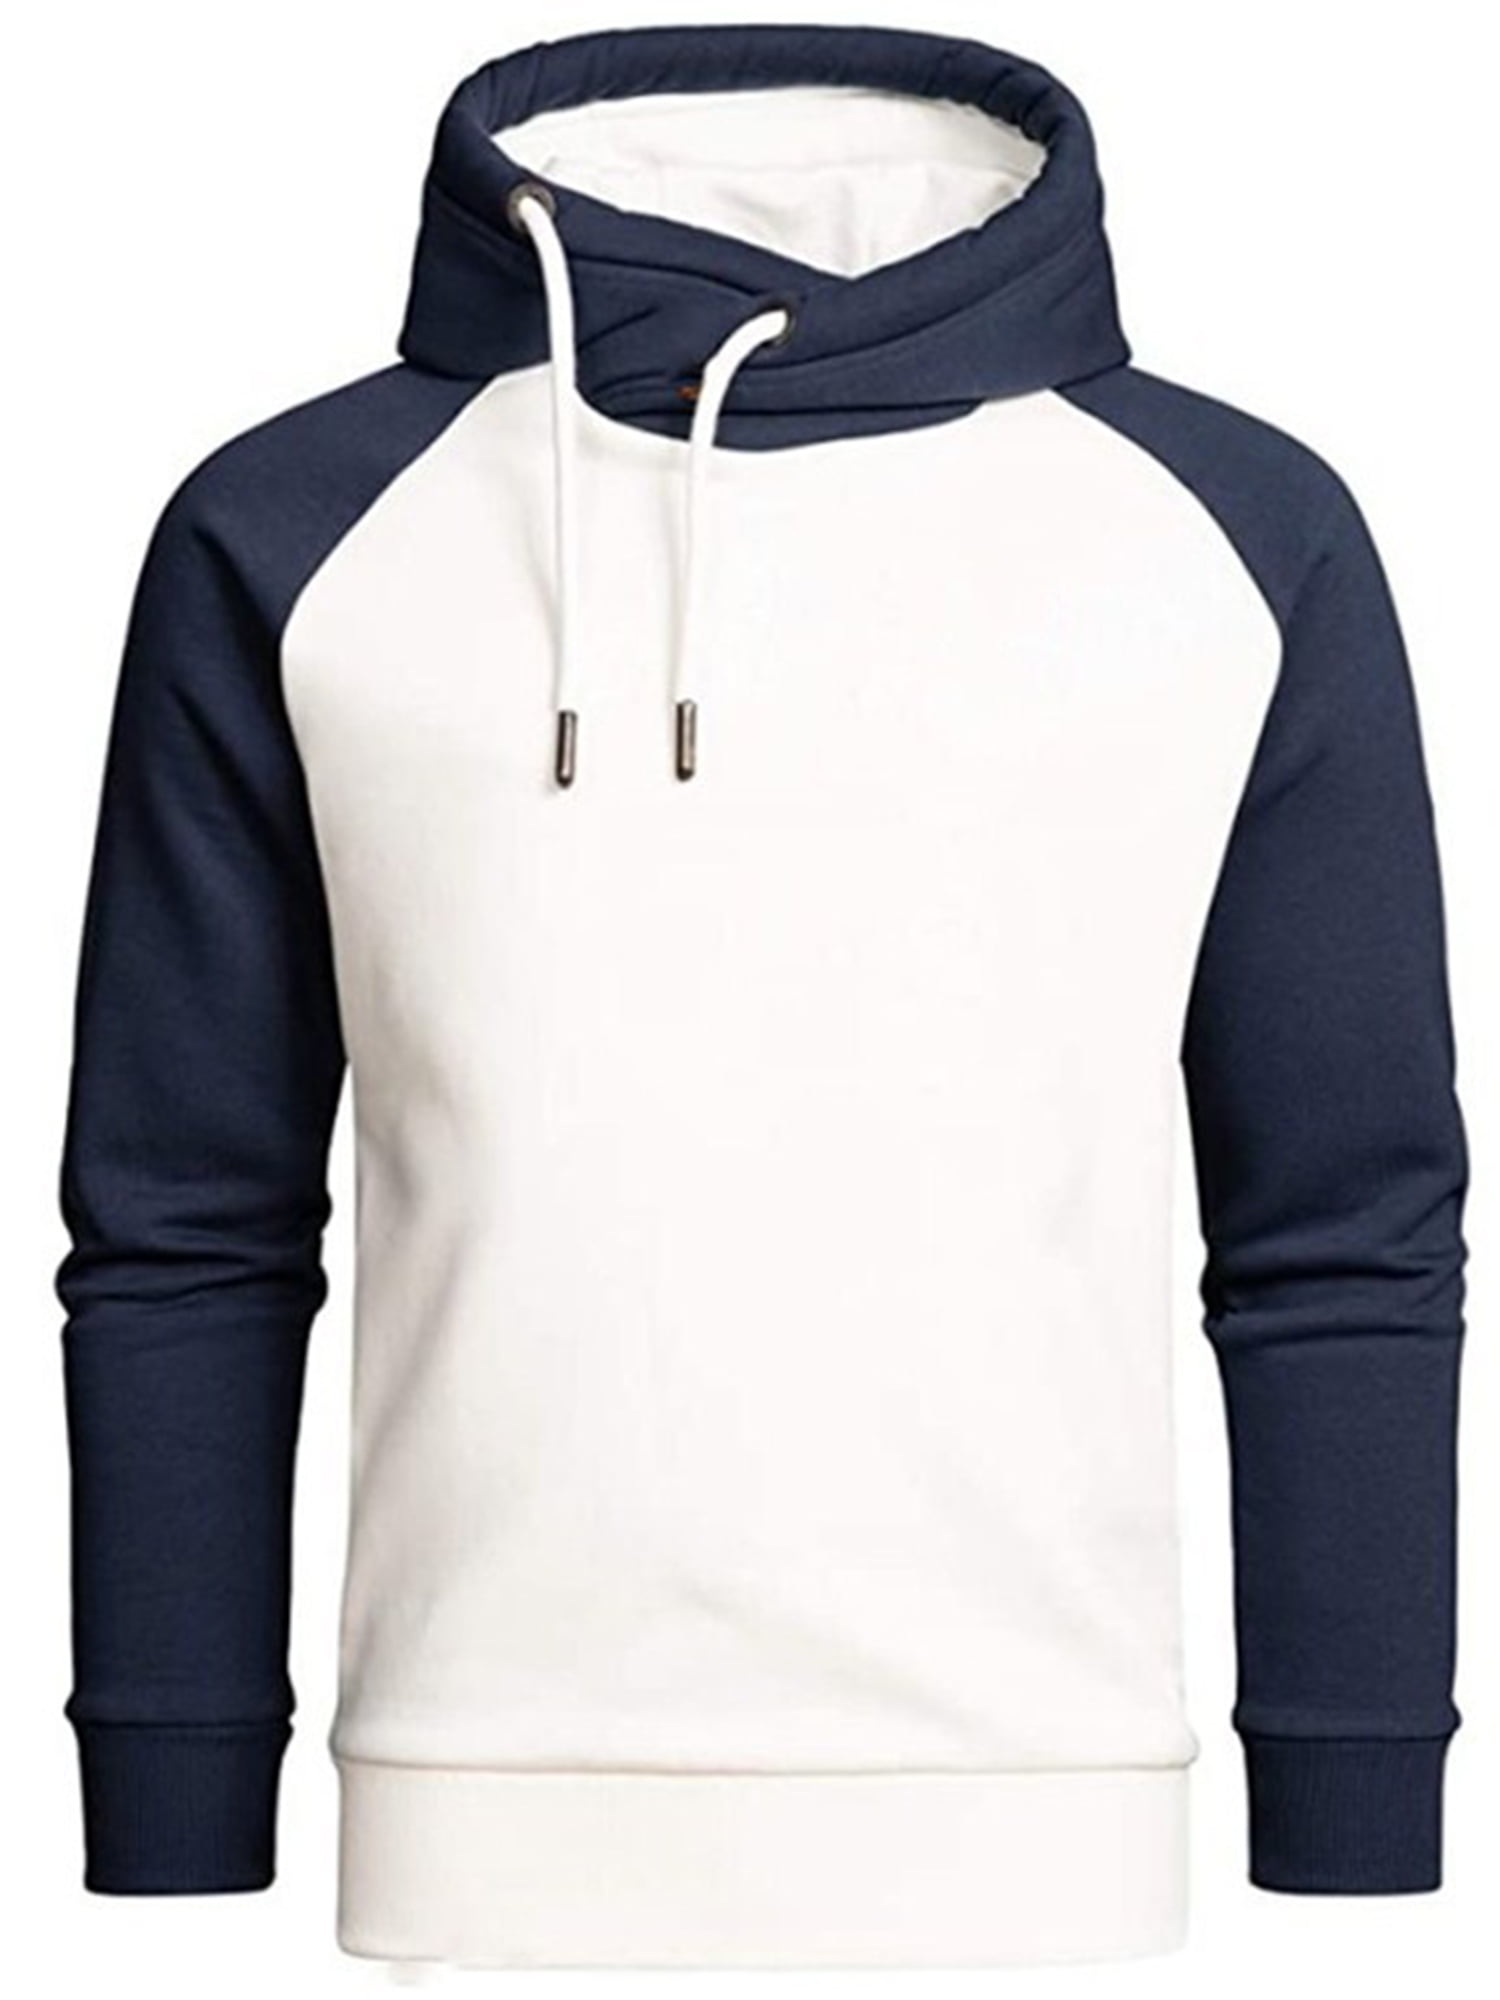 YAFINMO Lightning Deals of Today Prime Clearance 50 Dollar White Elephant  Gifts Men's Sweatshirts Mens Western Hoodies Pullover Half Zip Pullover Men